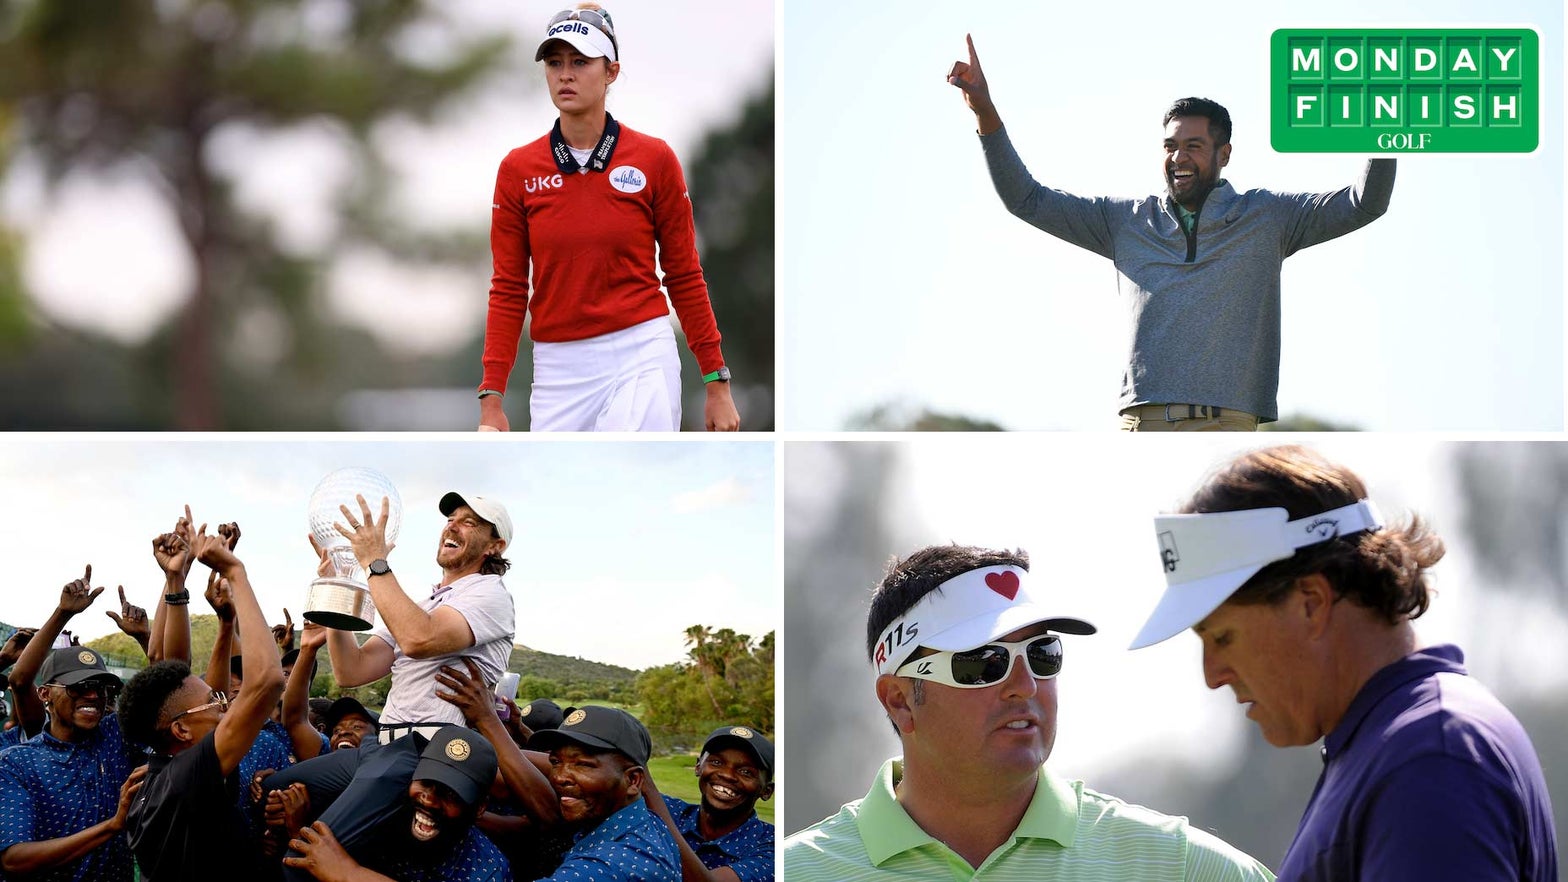 Unlikely winners, Mickelson insults, closet criers, journey bans